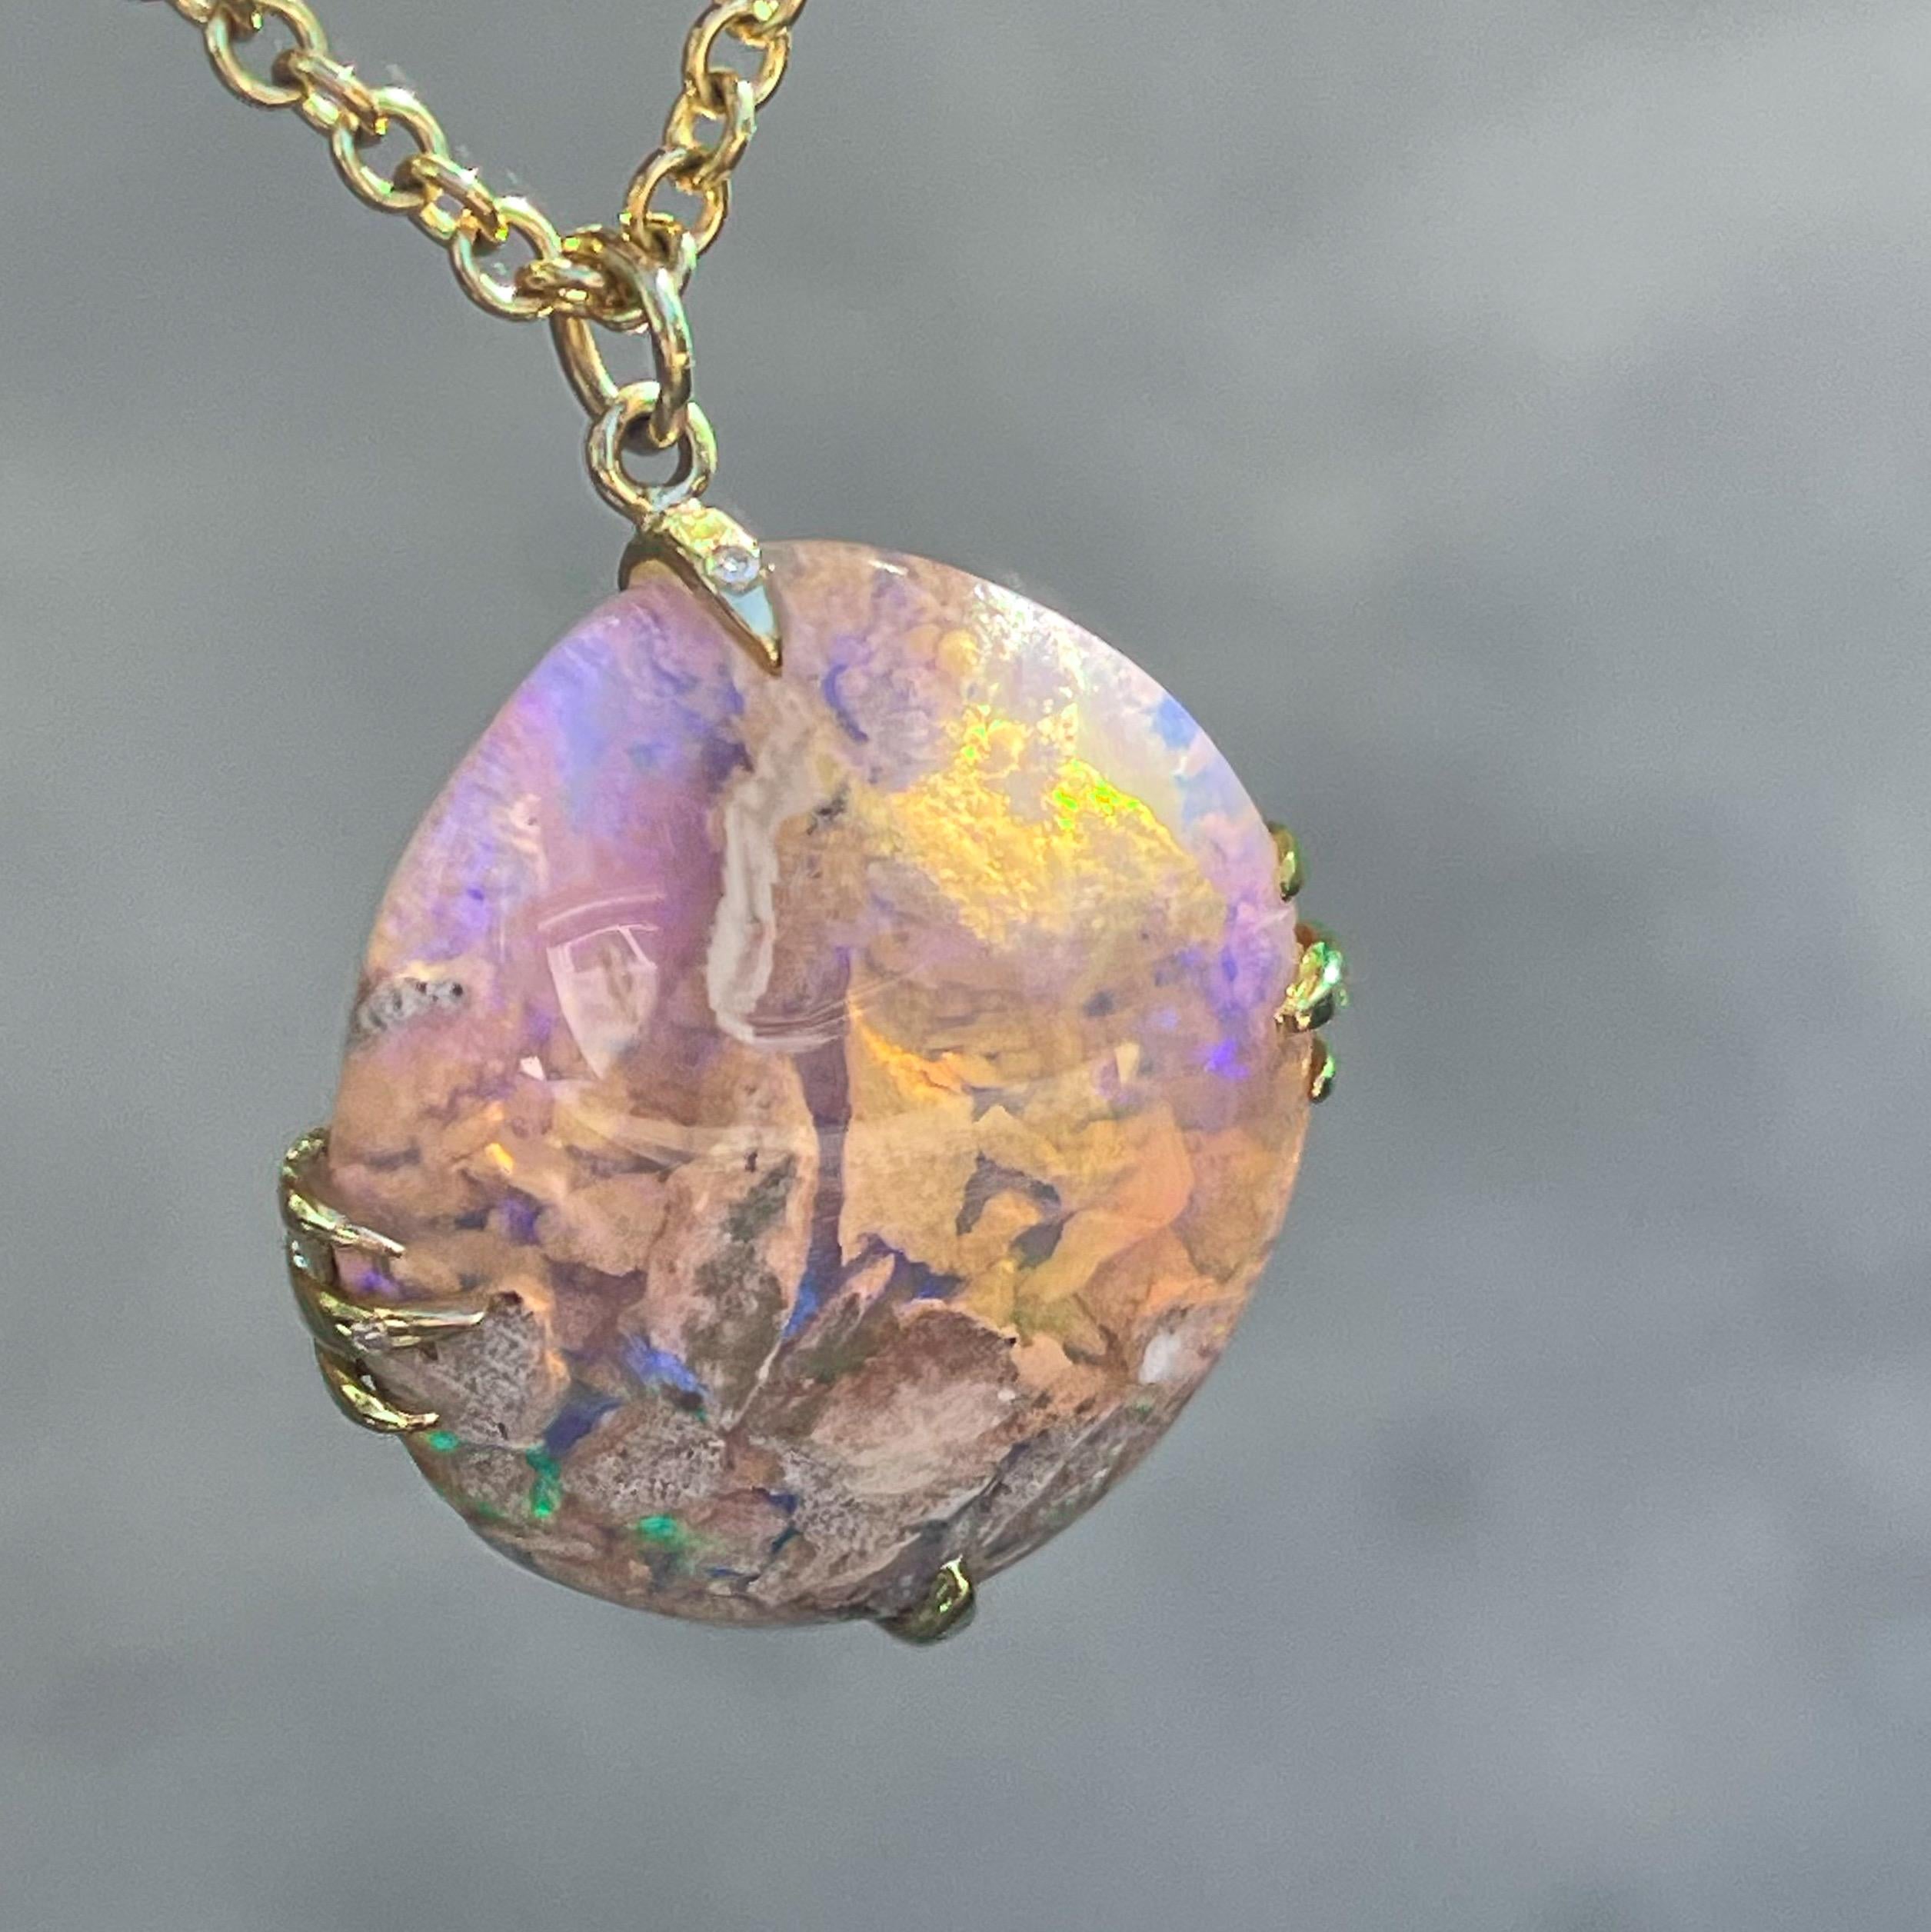 NIXIN Jewelry A Walk on the Moon Australian Opal Necklace in Gold with Diamonds 2